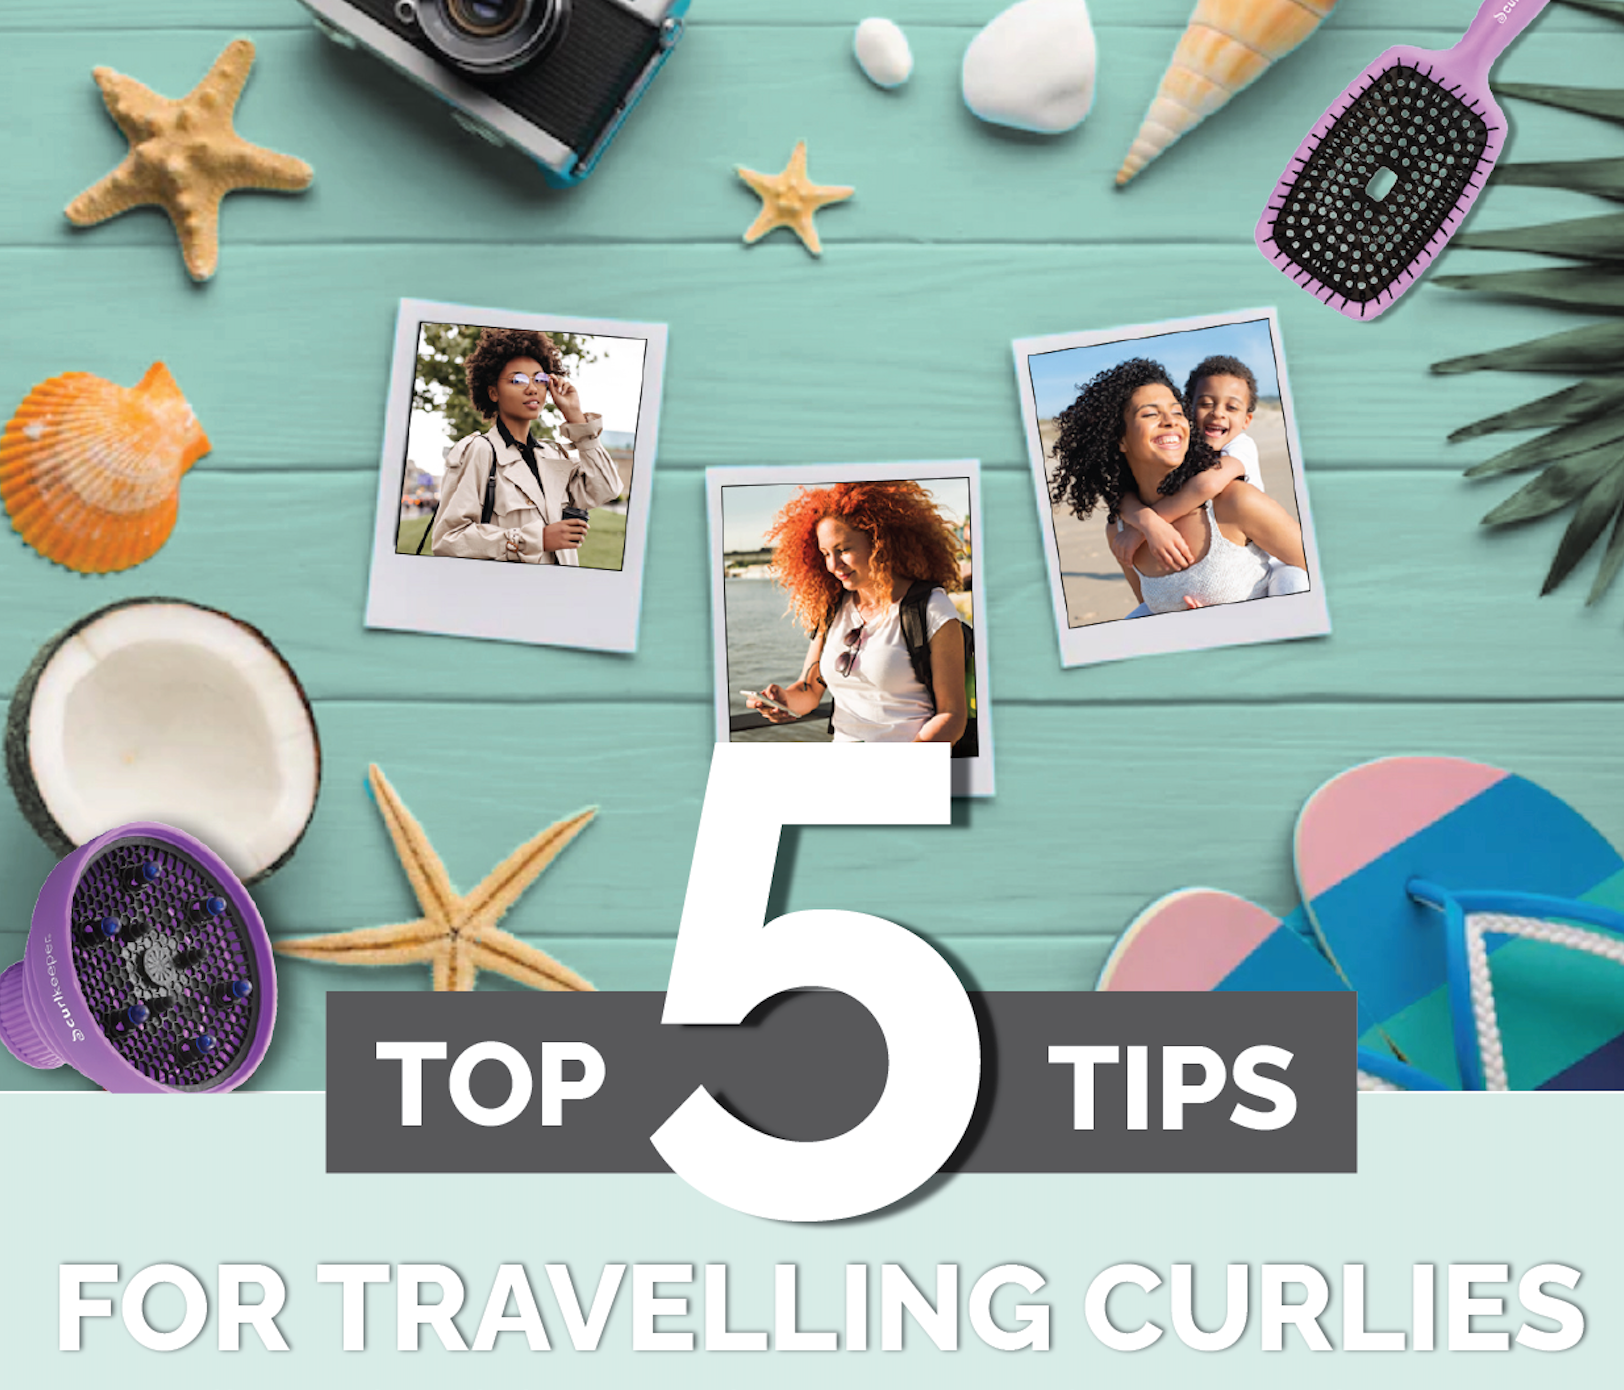 Top 5 Tips for Travelling Curlies